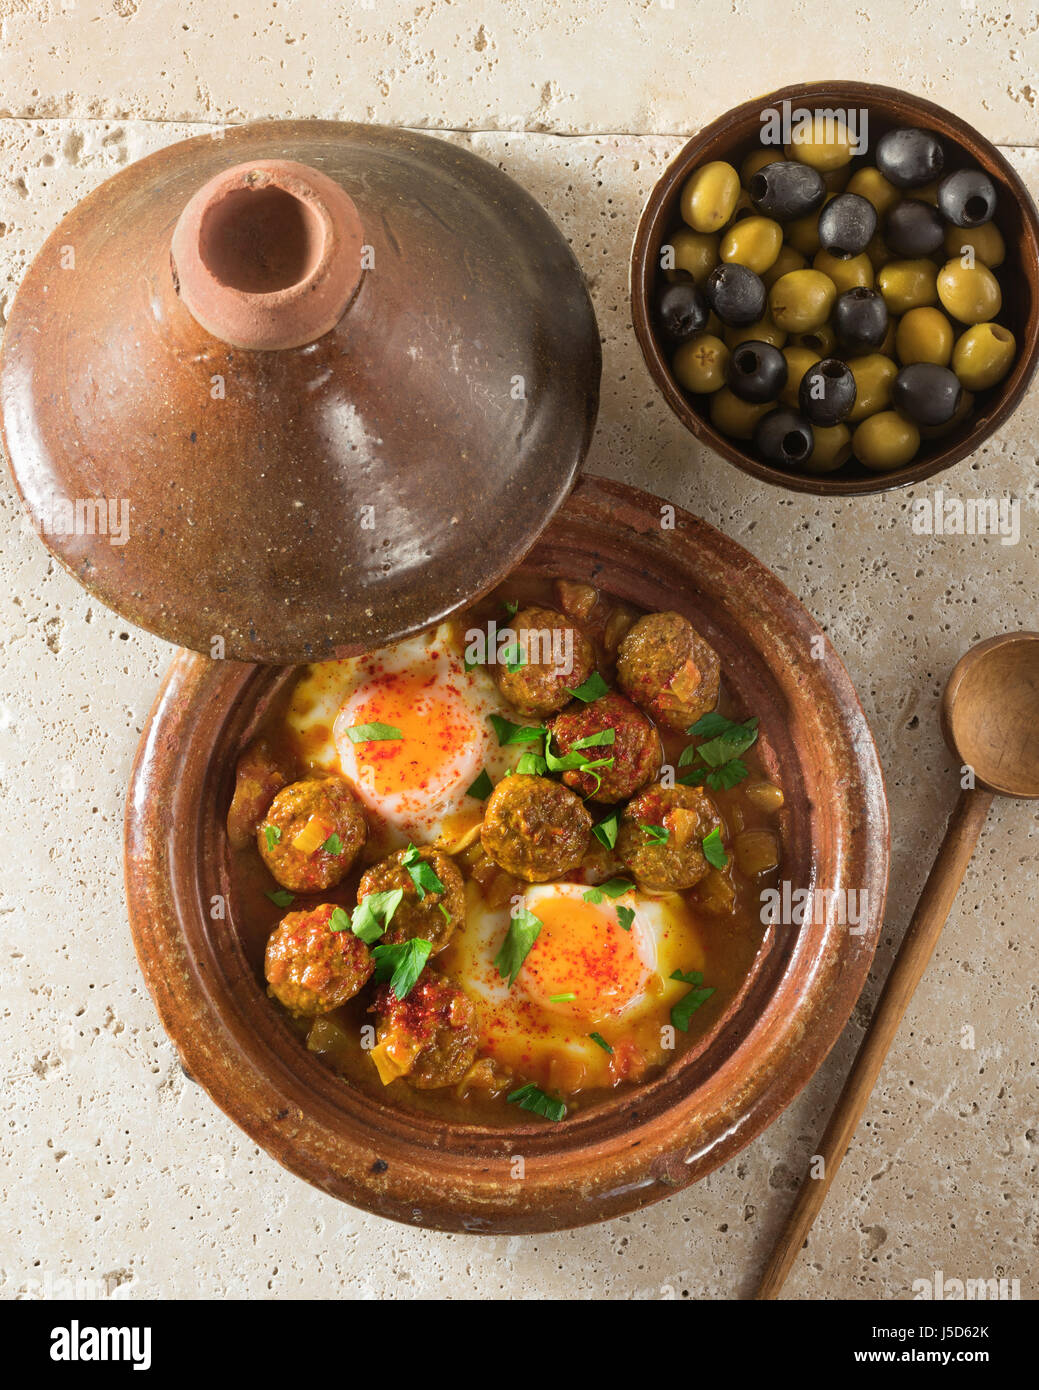 Kefta tagine. Spicy meatballs with eggs. Morocco Food Stock Photo